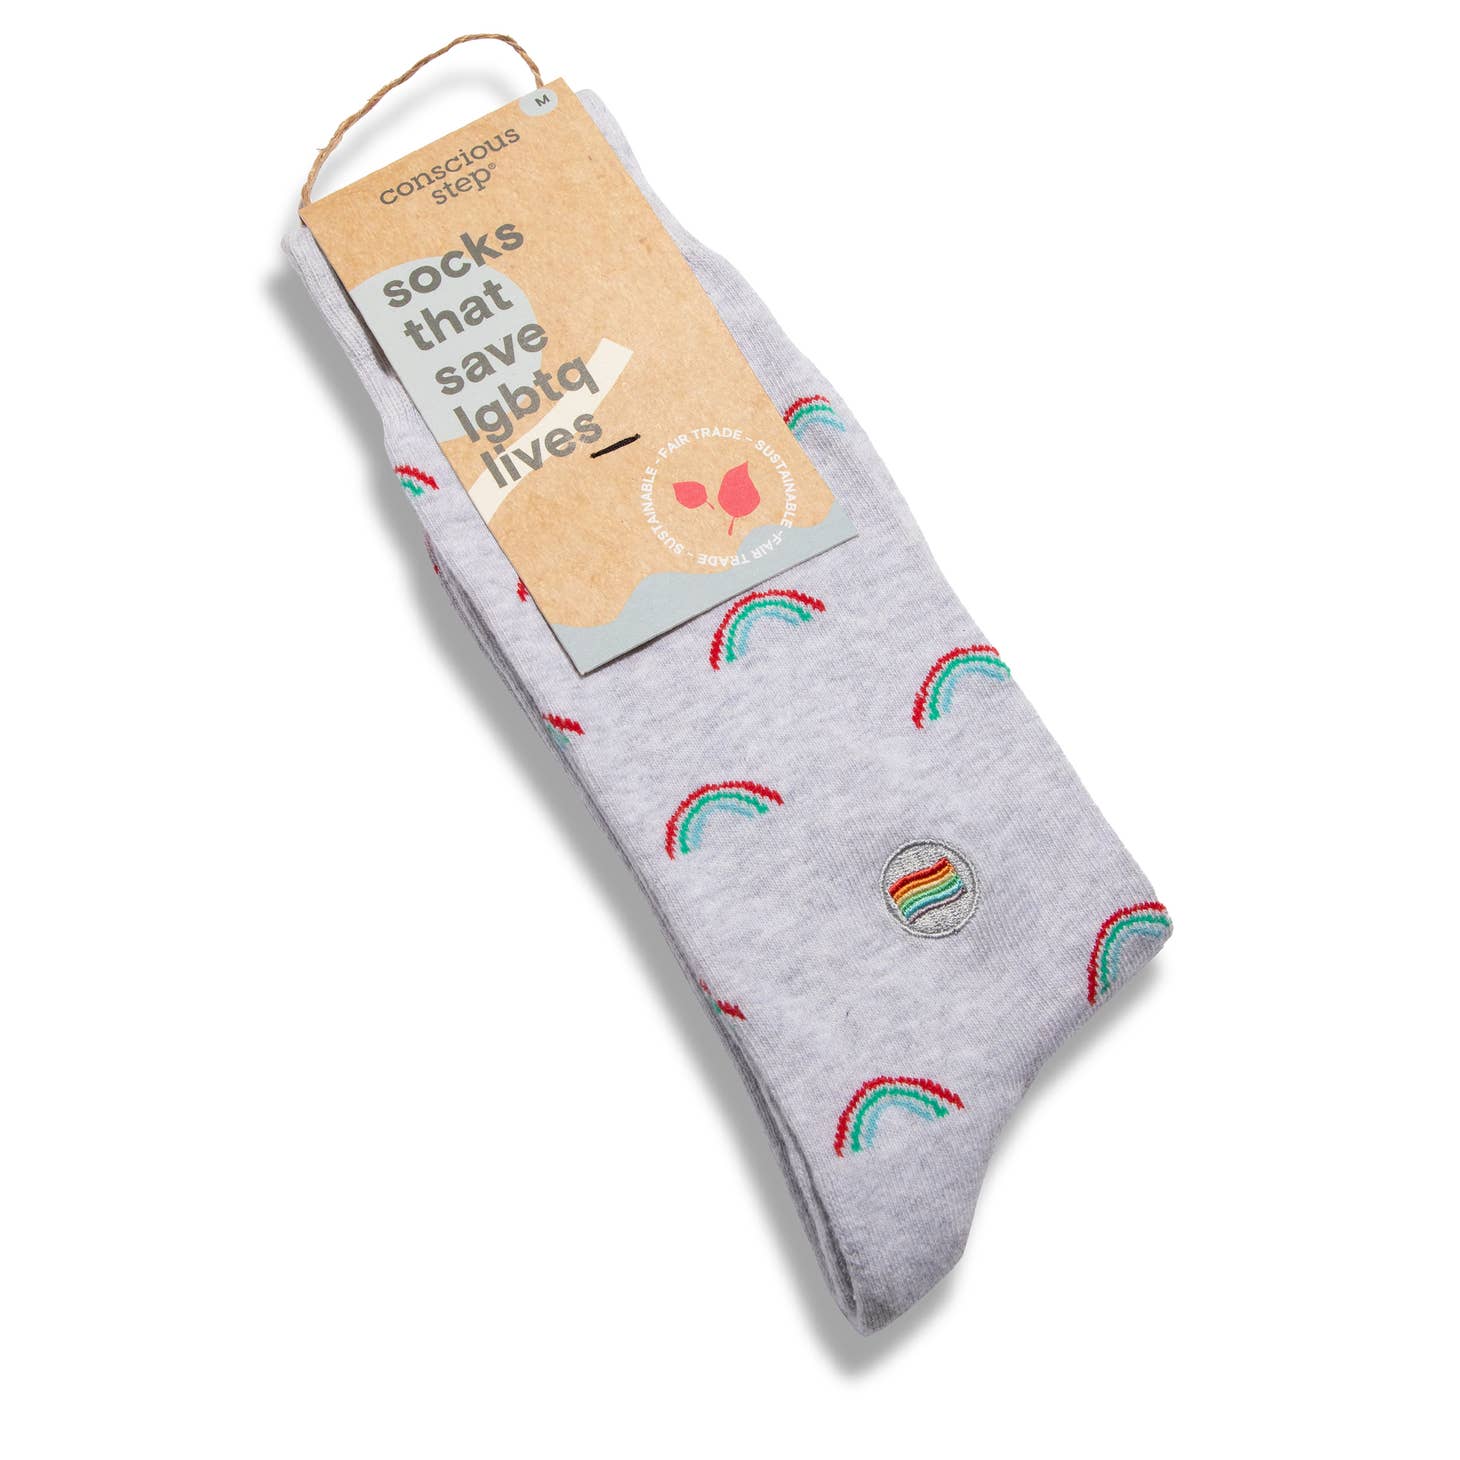 Radiant Rainbow Socks that support LGBTQ lives, made from sustainable and secondhand materials.